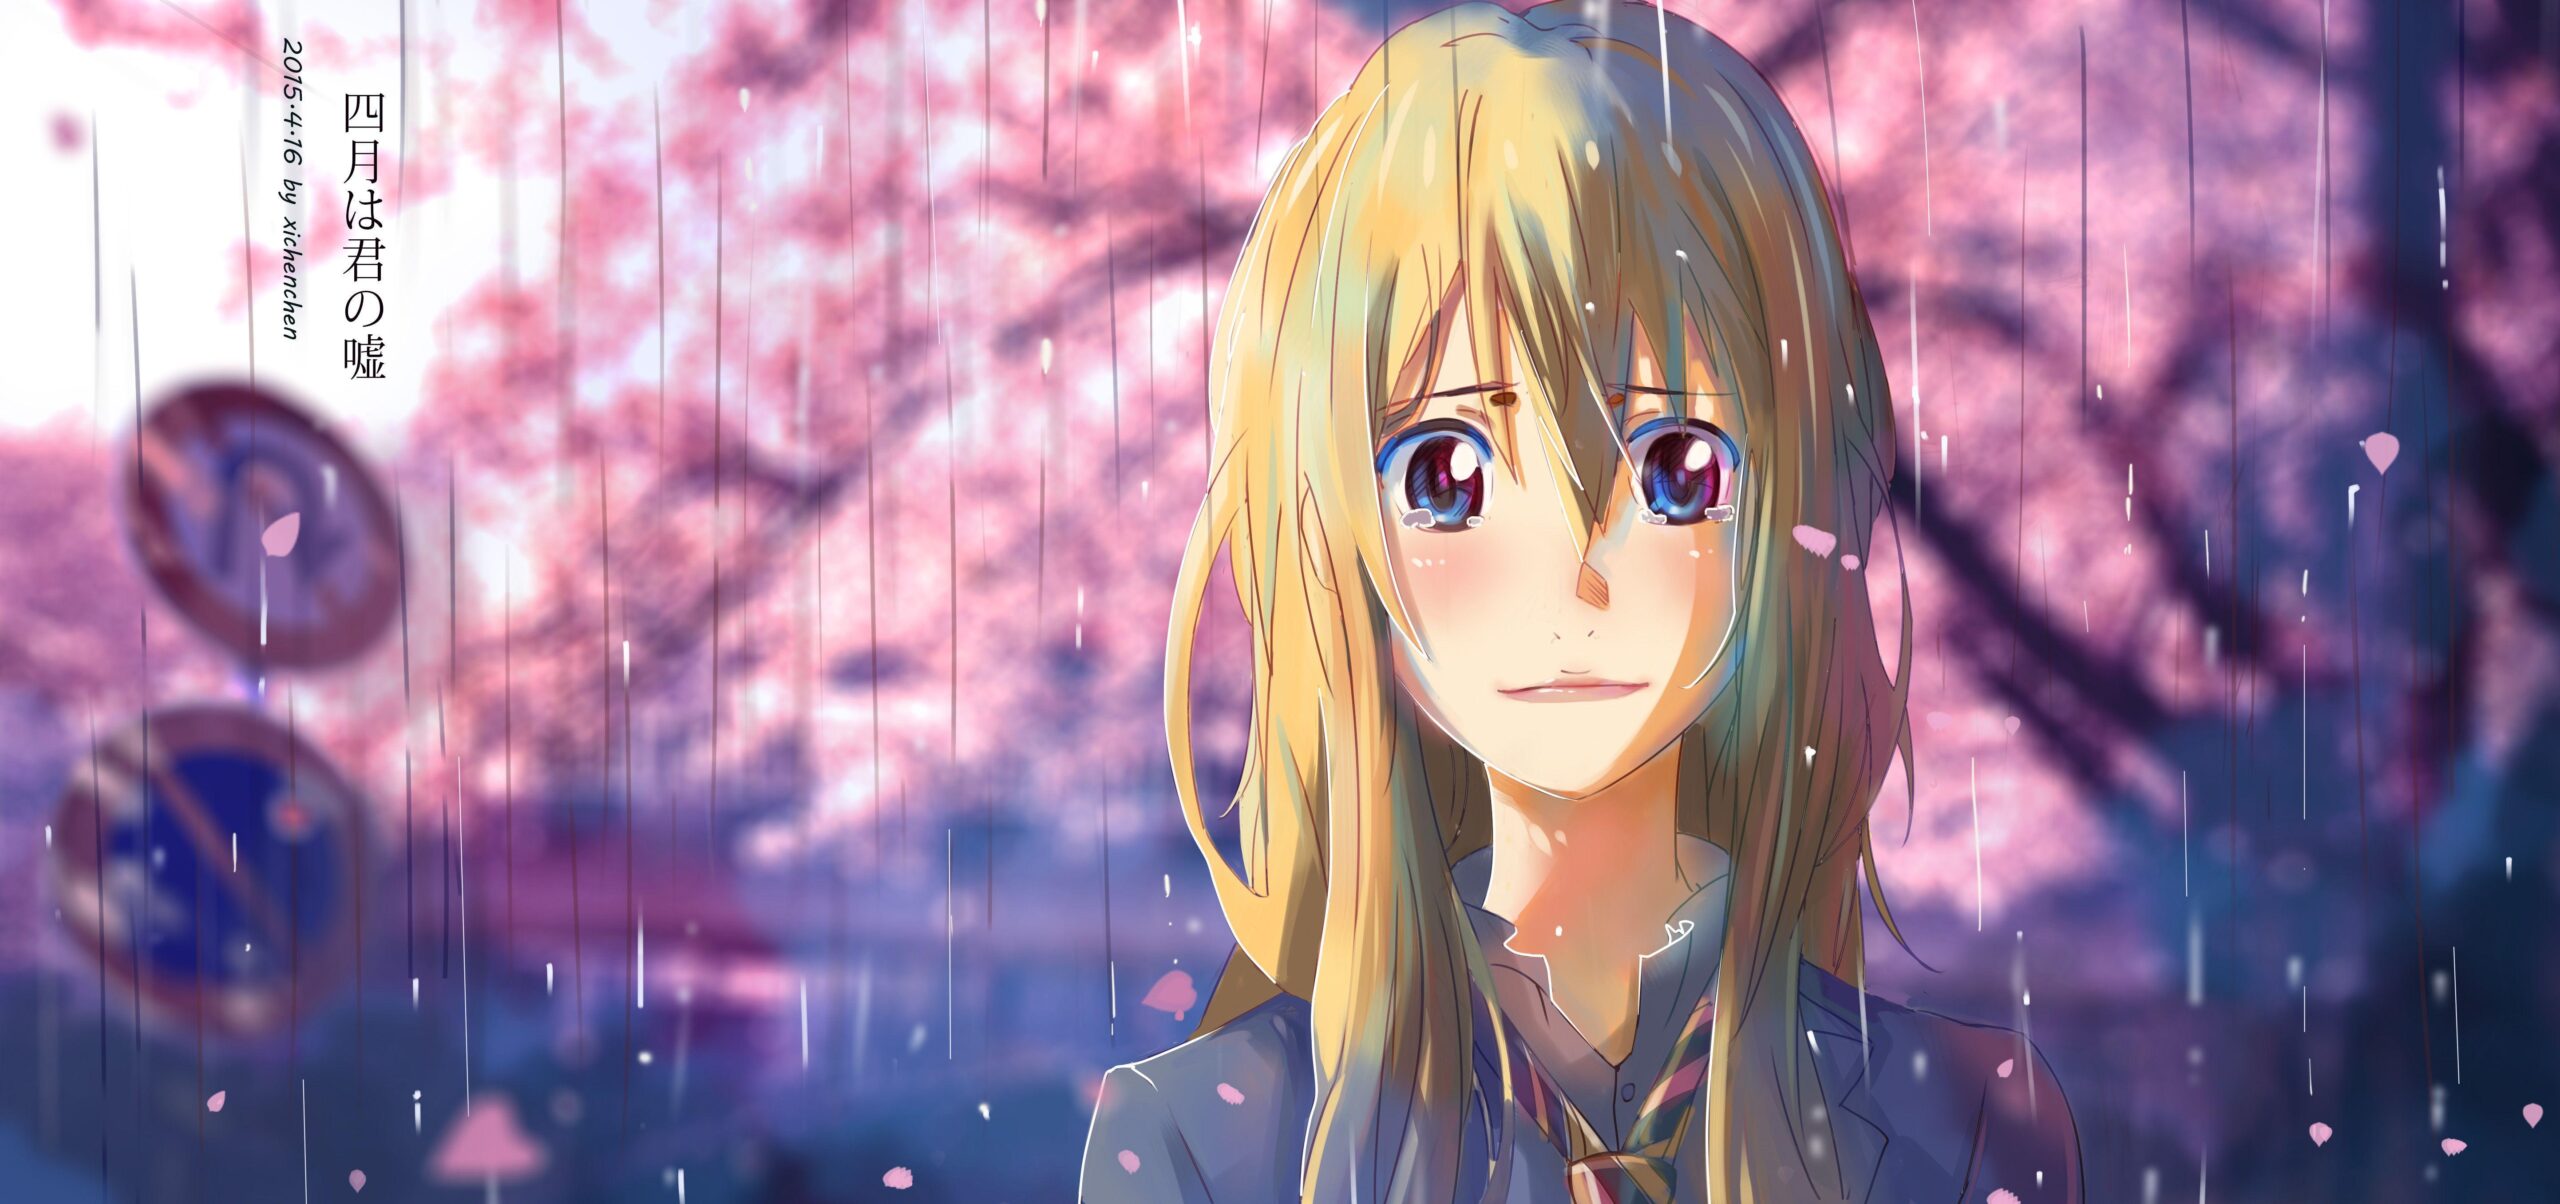 Your Lie In April Wallpaper For Ipad